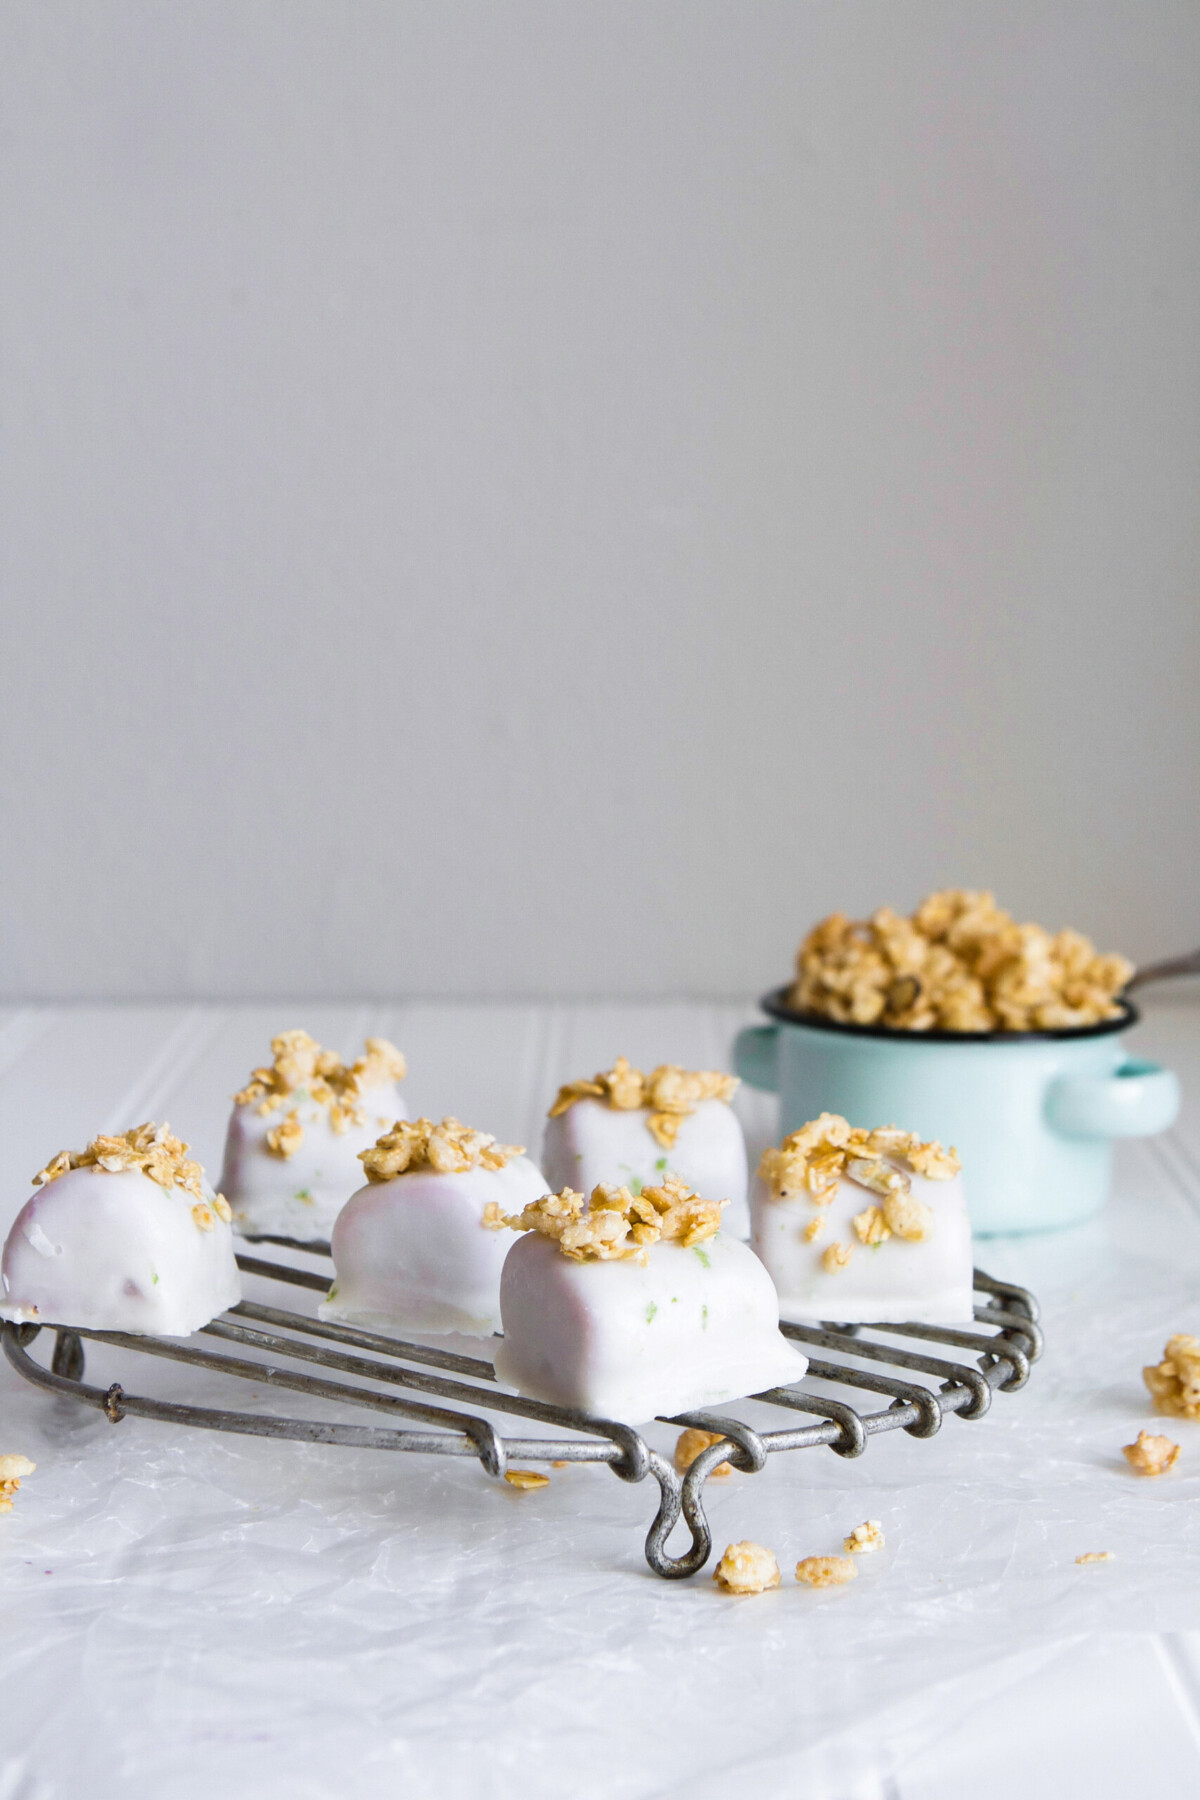 These healthy tropical smoothie bites are enrobed in a silky-smooth lime coconut milk and topped with granola for a satisfying sweet treat. | from Lauren Grant of Zestful Kitchen